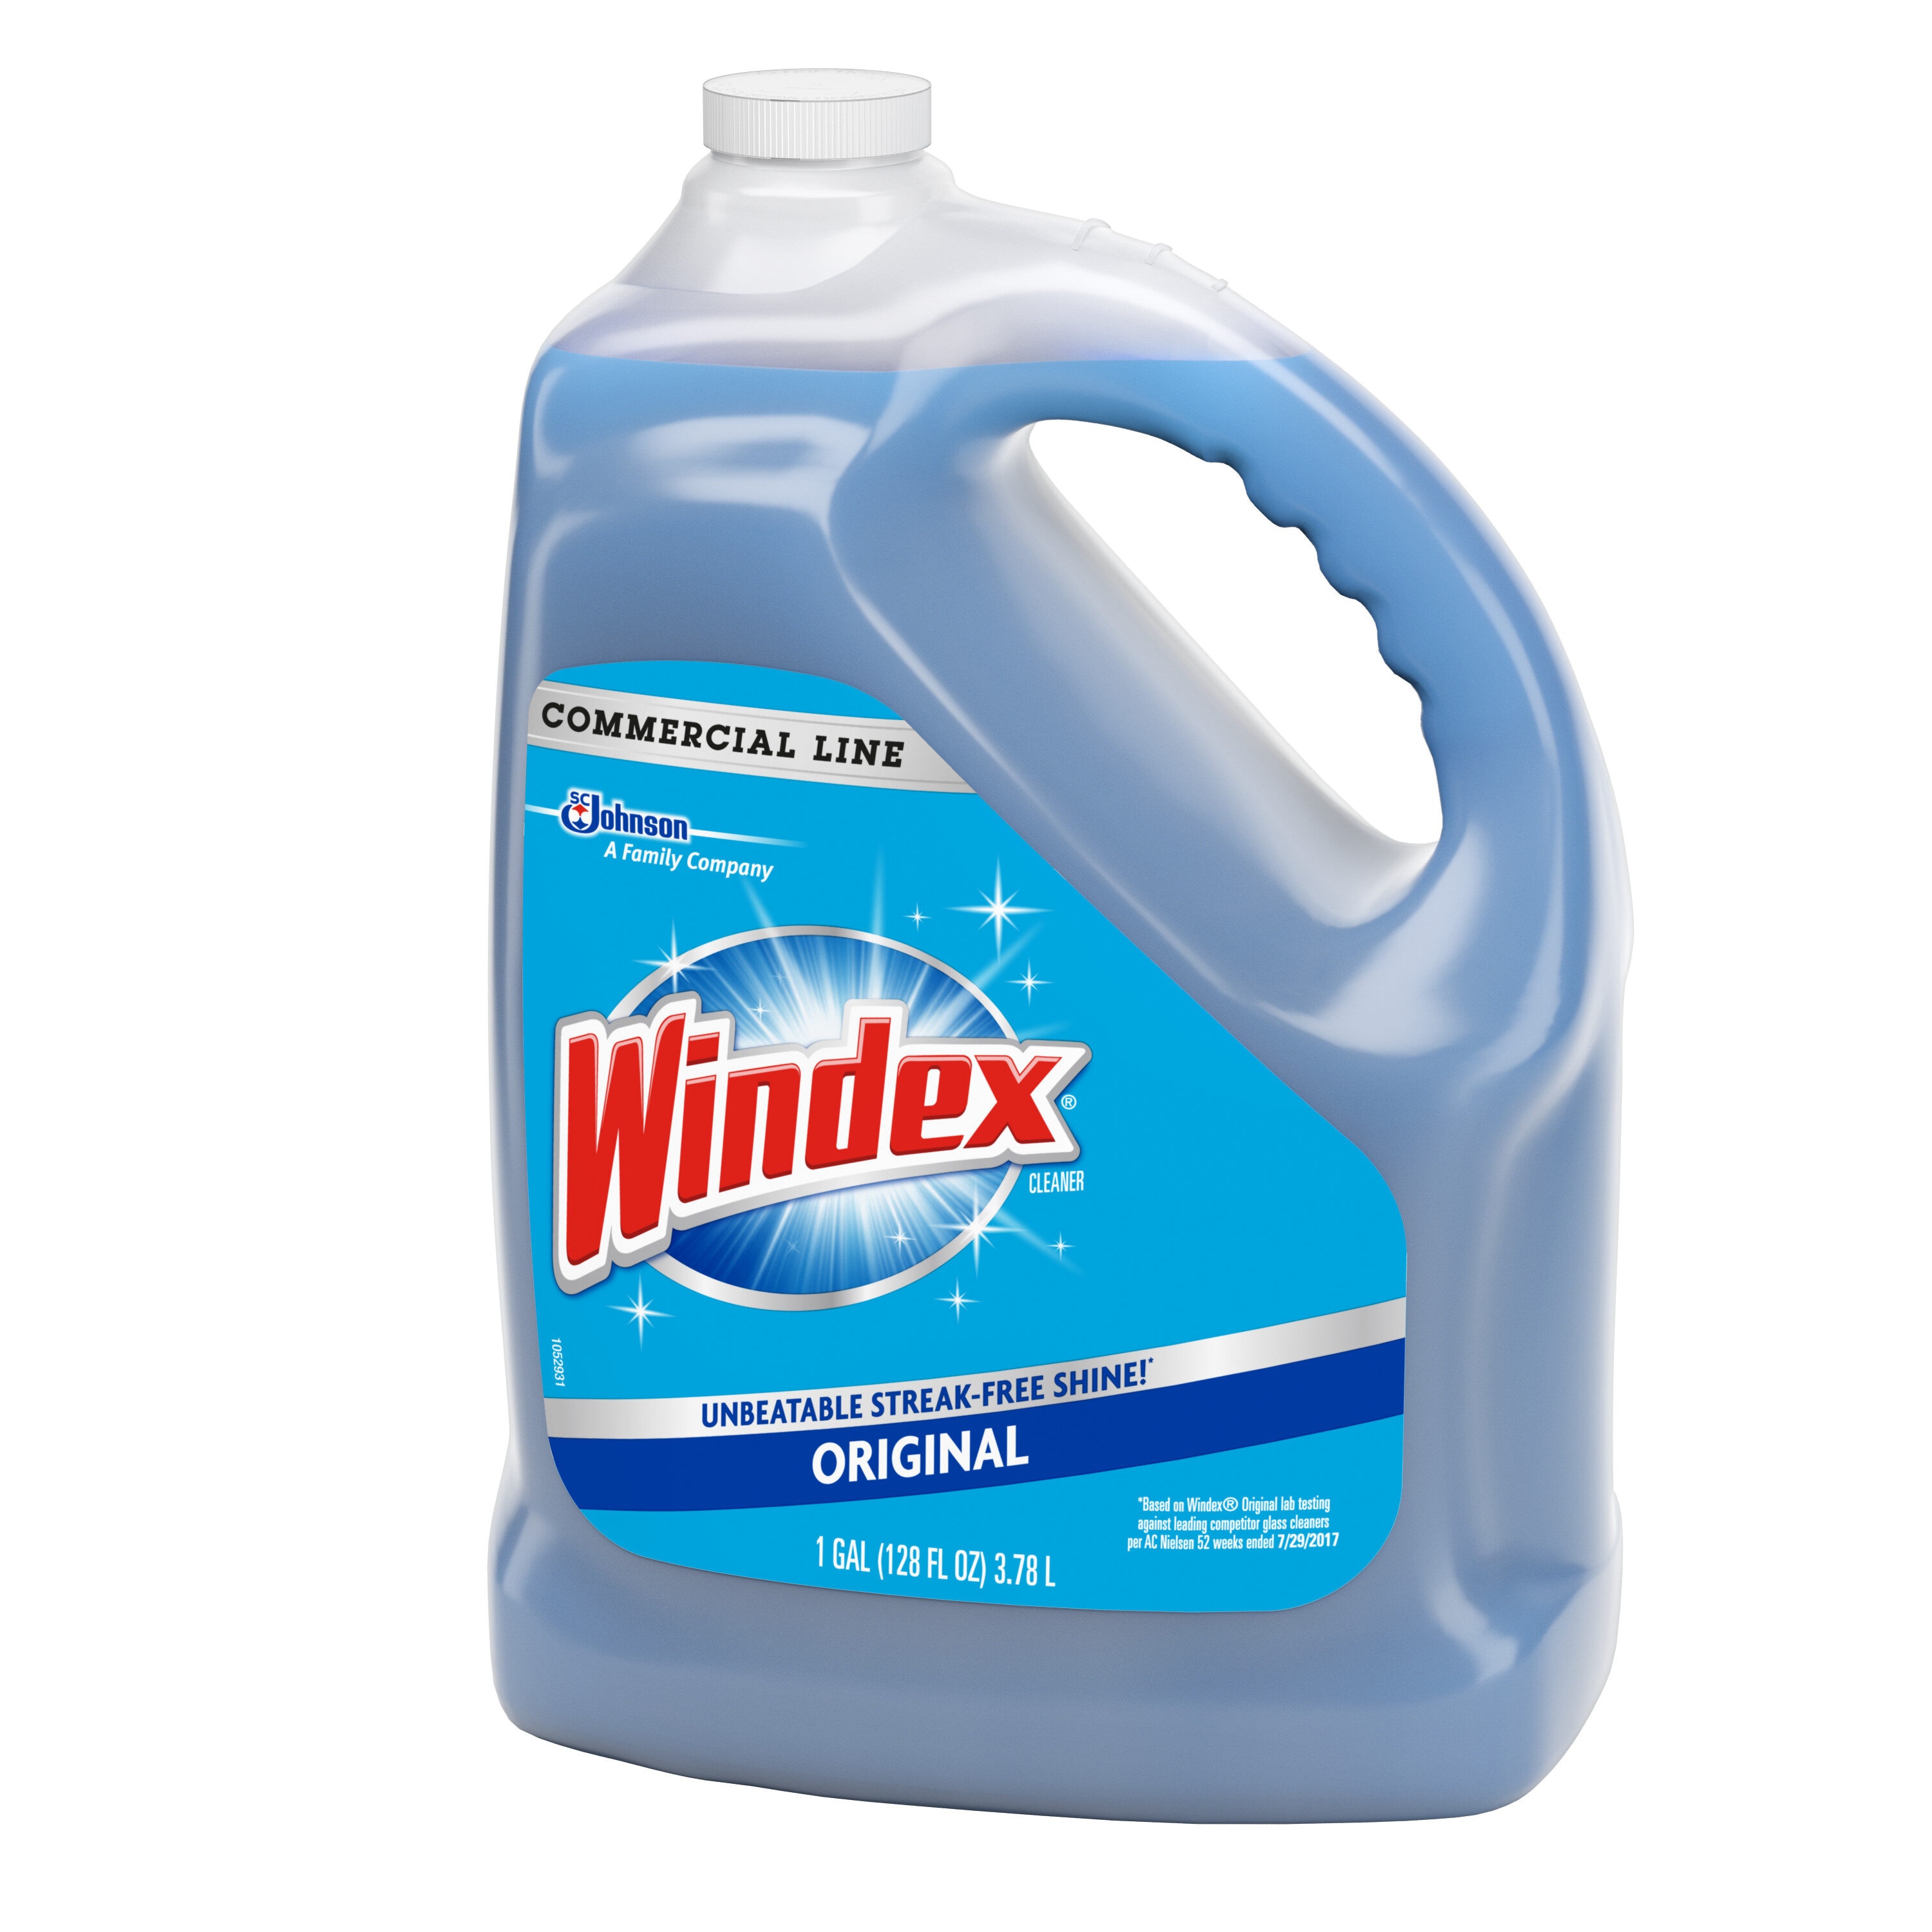 Windex® Original Glass Cleaner - Purcellville, VA - Southern States  Purcellville